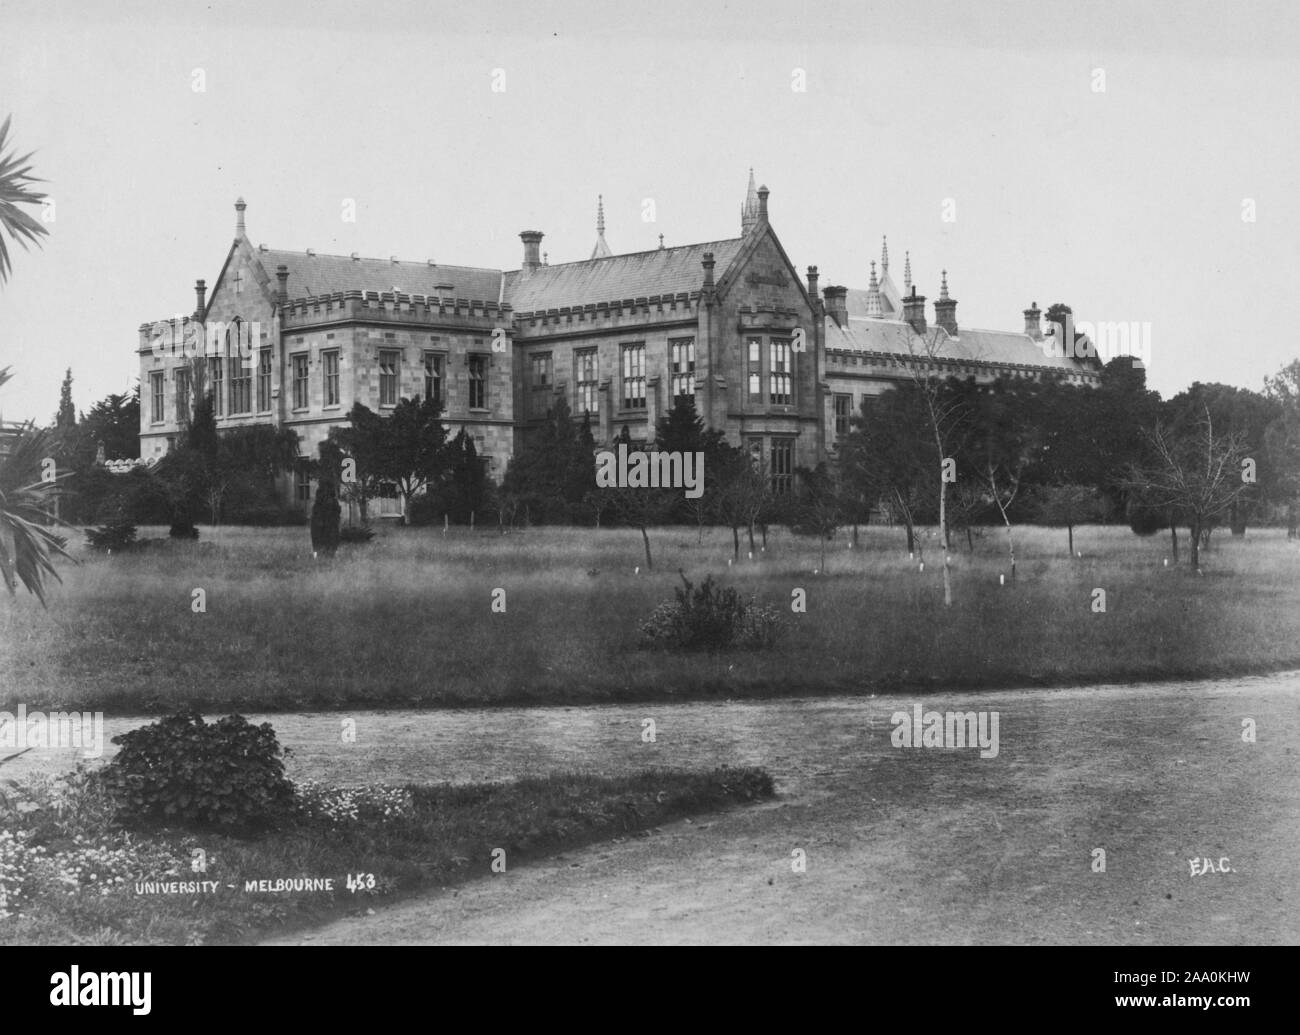 Black and white photograph of the original building of the University of Melbourne in Melbourne, now known as the Old Quad, Melbourne, Australia, by photographer Frank Coxhead, 1885. From the New York Public Library. () Stock Photo